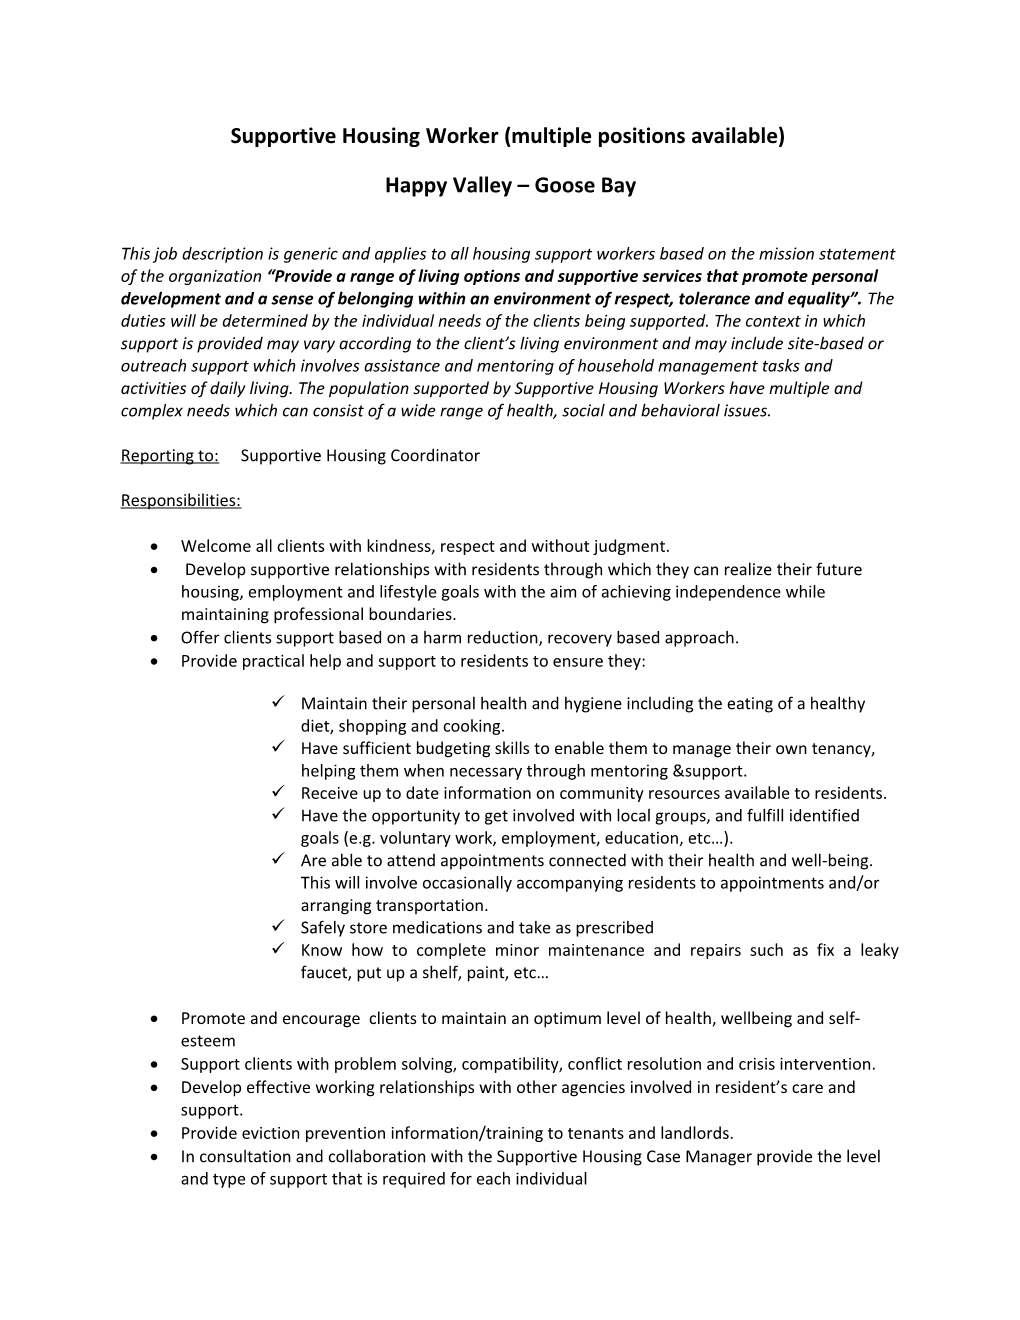 Supportive Housing Worker (Multiple Positions Available)